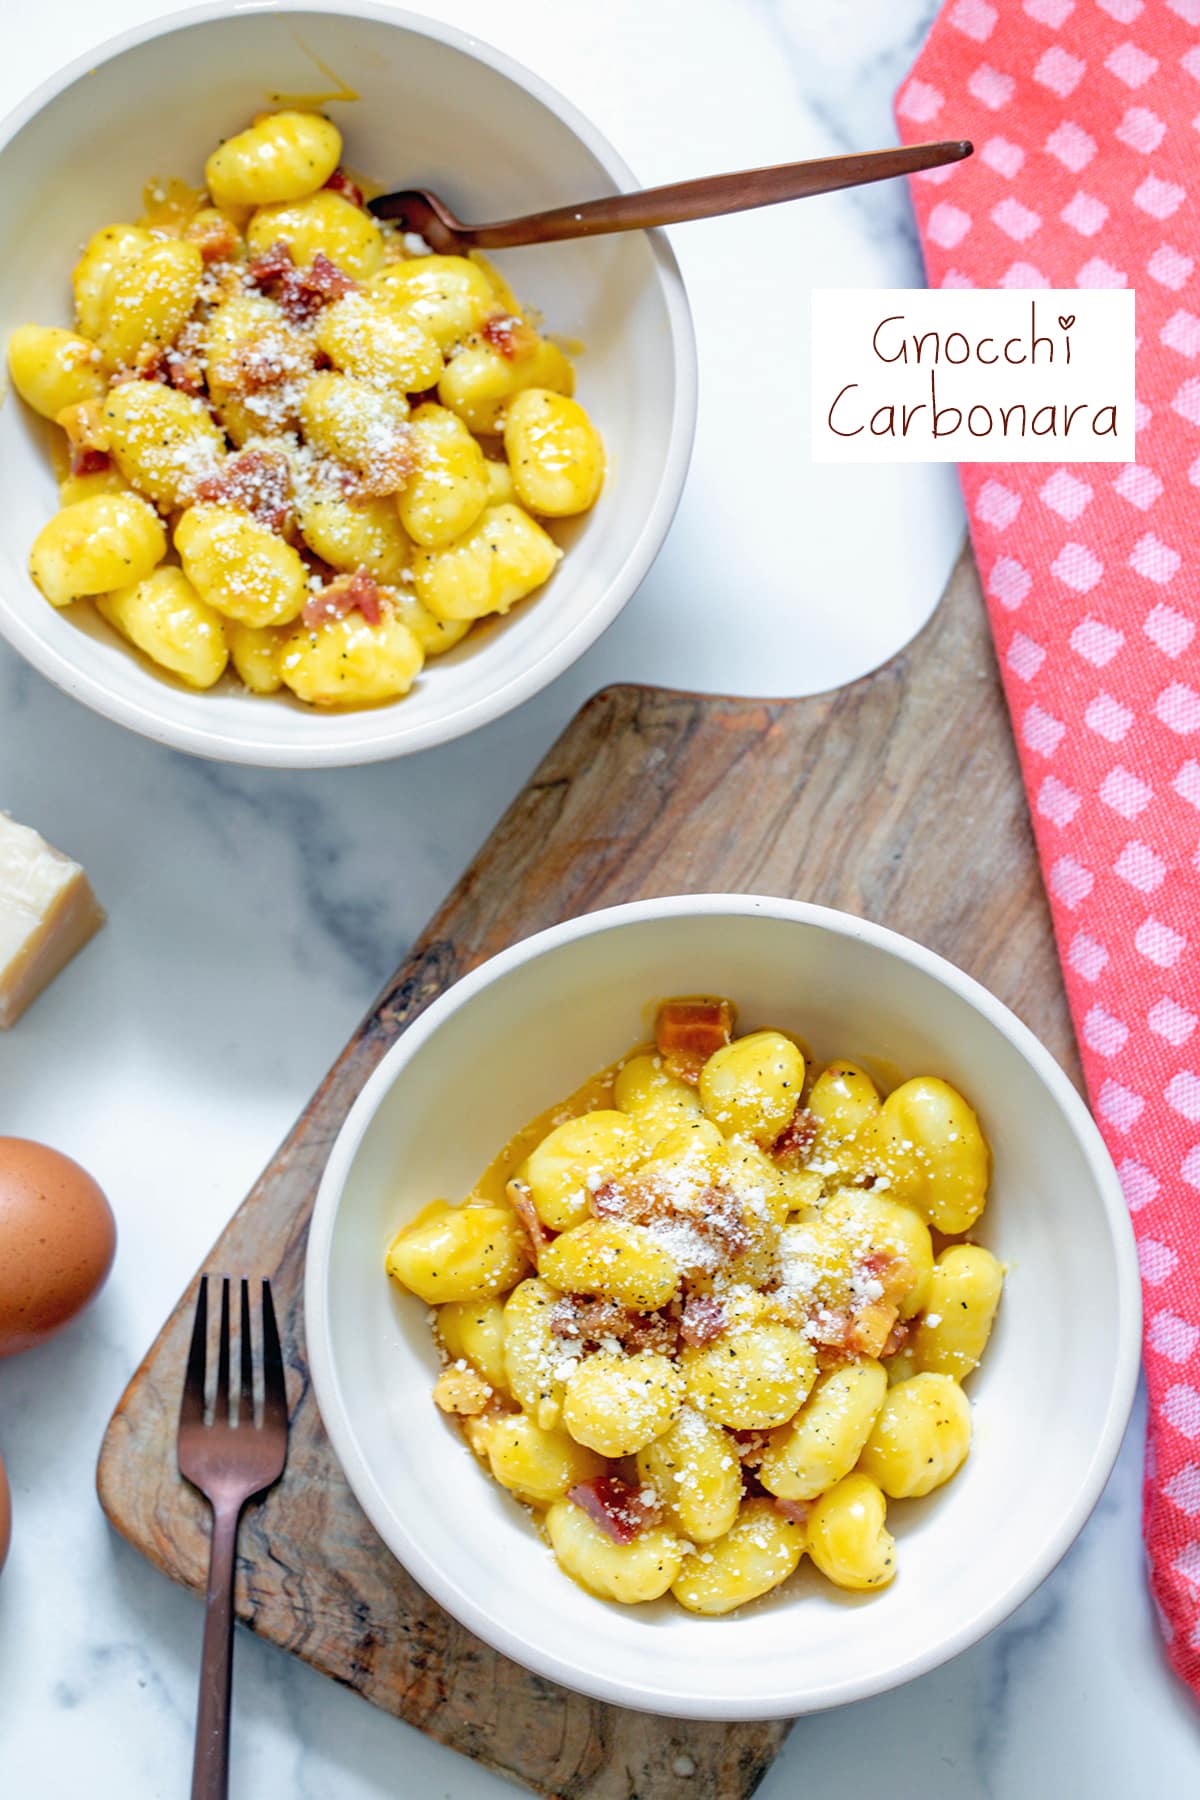 Overhead view of two bowls of gnocchi carbonara with recipe title at top.